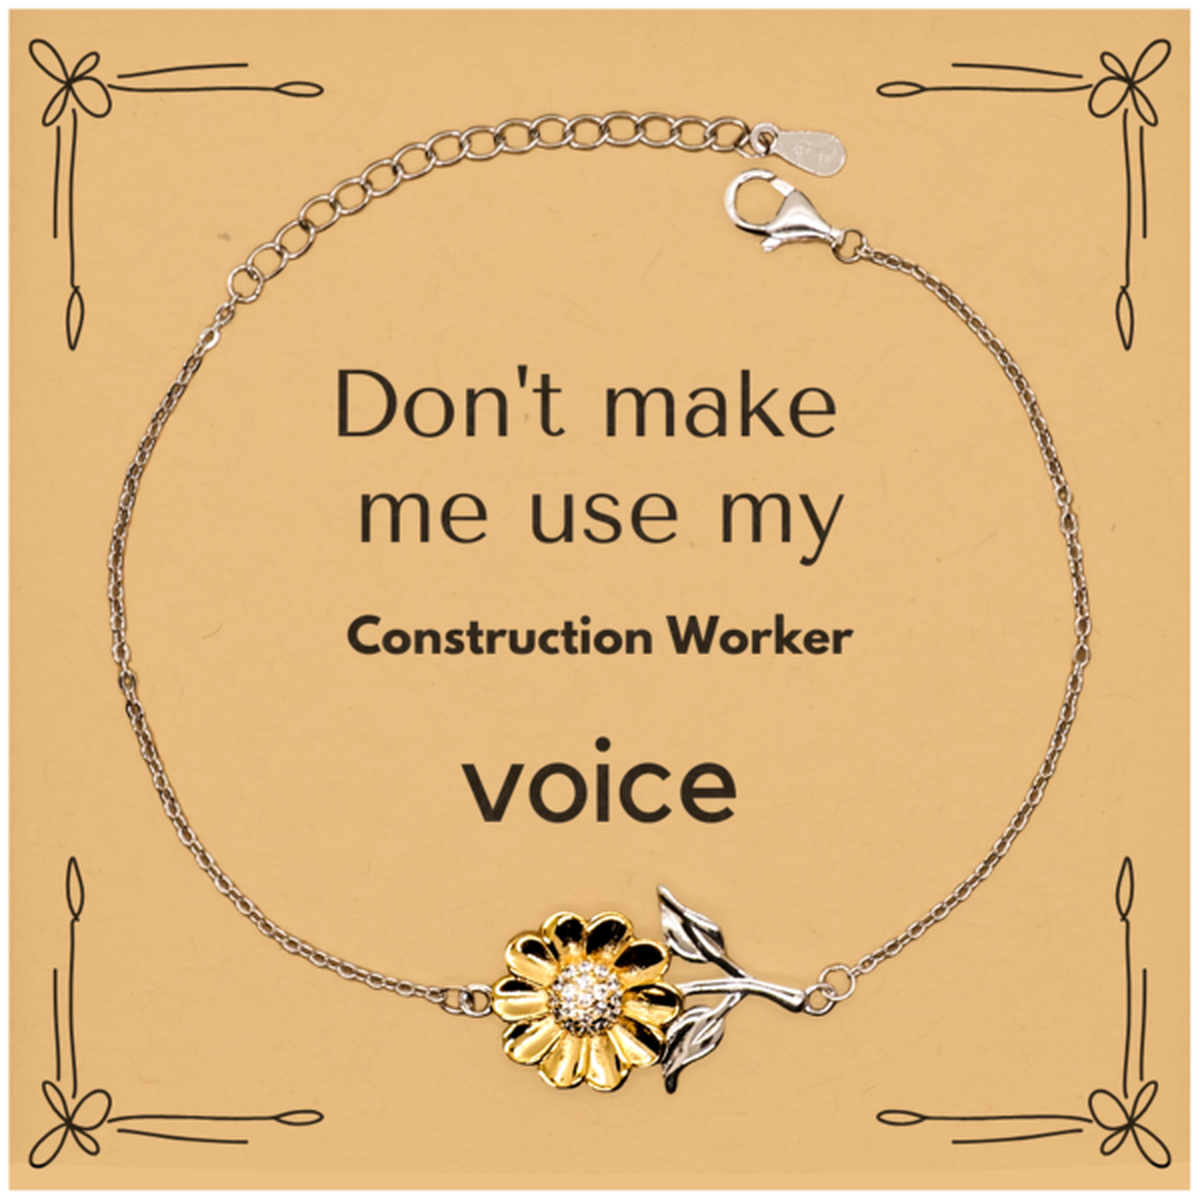 Don't make me use my Construction Worker voice, Sarcasm Construction Worker Card Gifts, Christmas Construction Worker Sunflower Bracelet Birthday Unique Gifts For Construction Worker Coworkers, Men, Women, Colleague, Friends